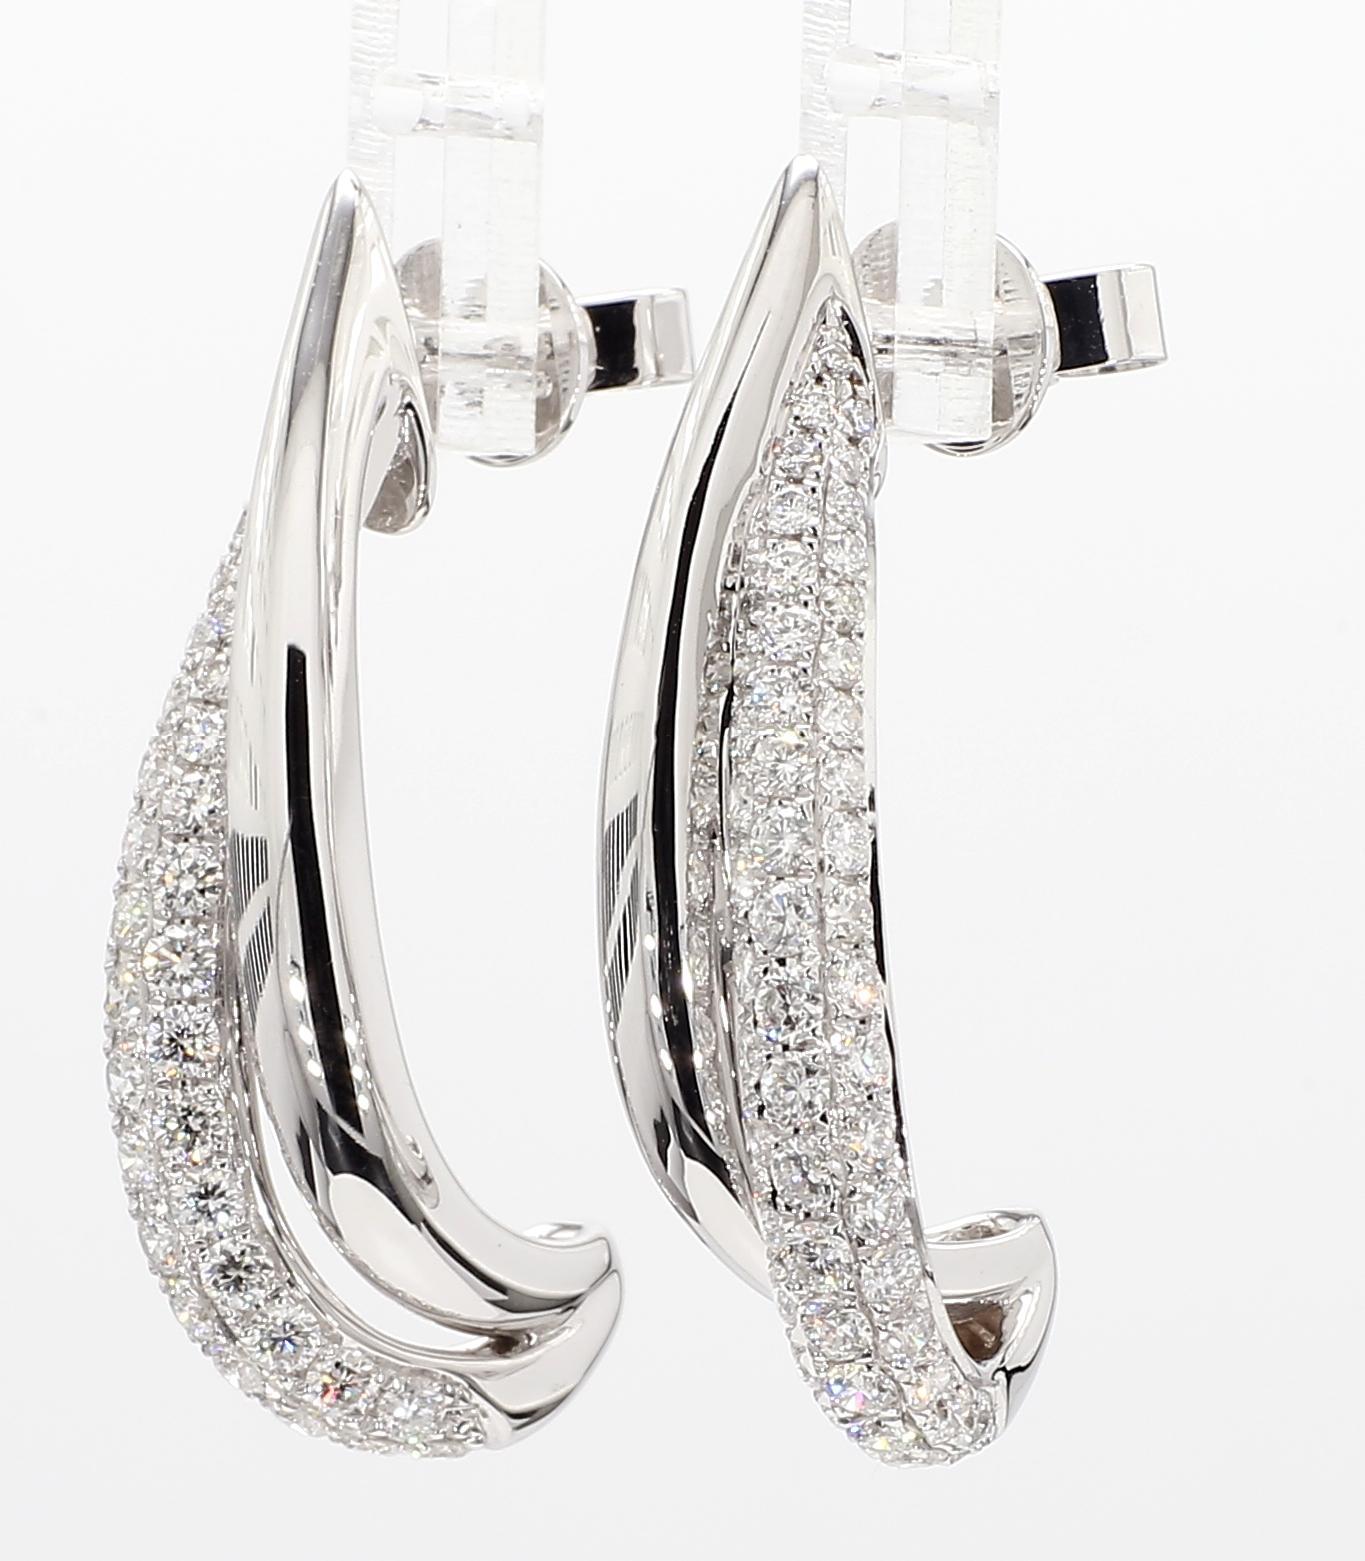 RareGemWorld's classic diamond earrings. Mounted in a beautiful 18K White Gold setting with natural round cut white diamonds. These earrings are guaranteed to impress and enhance your personal collection!

Total Weight: 2.02cts

Natural Round White